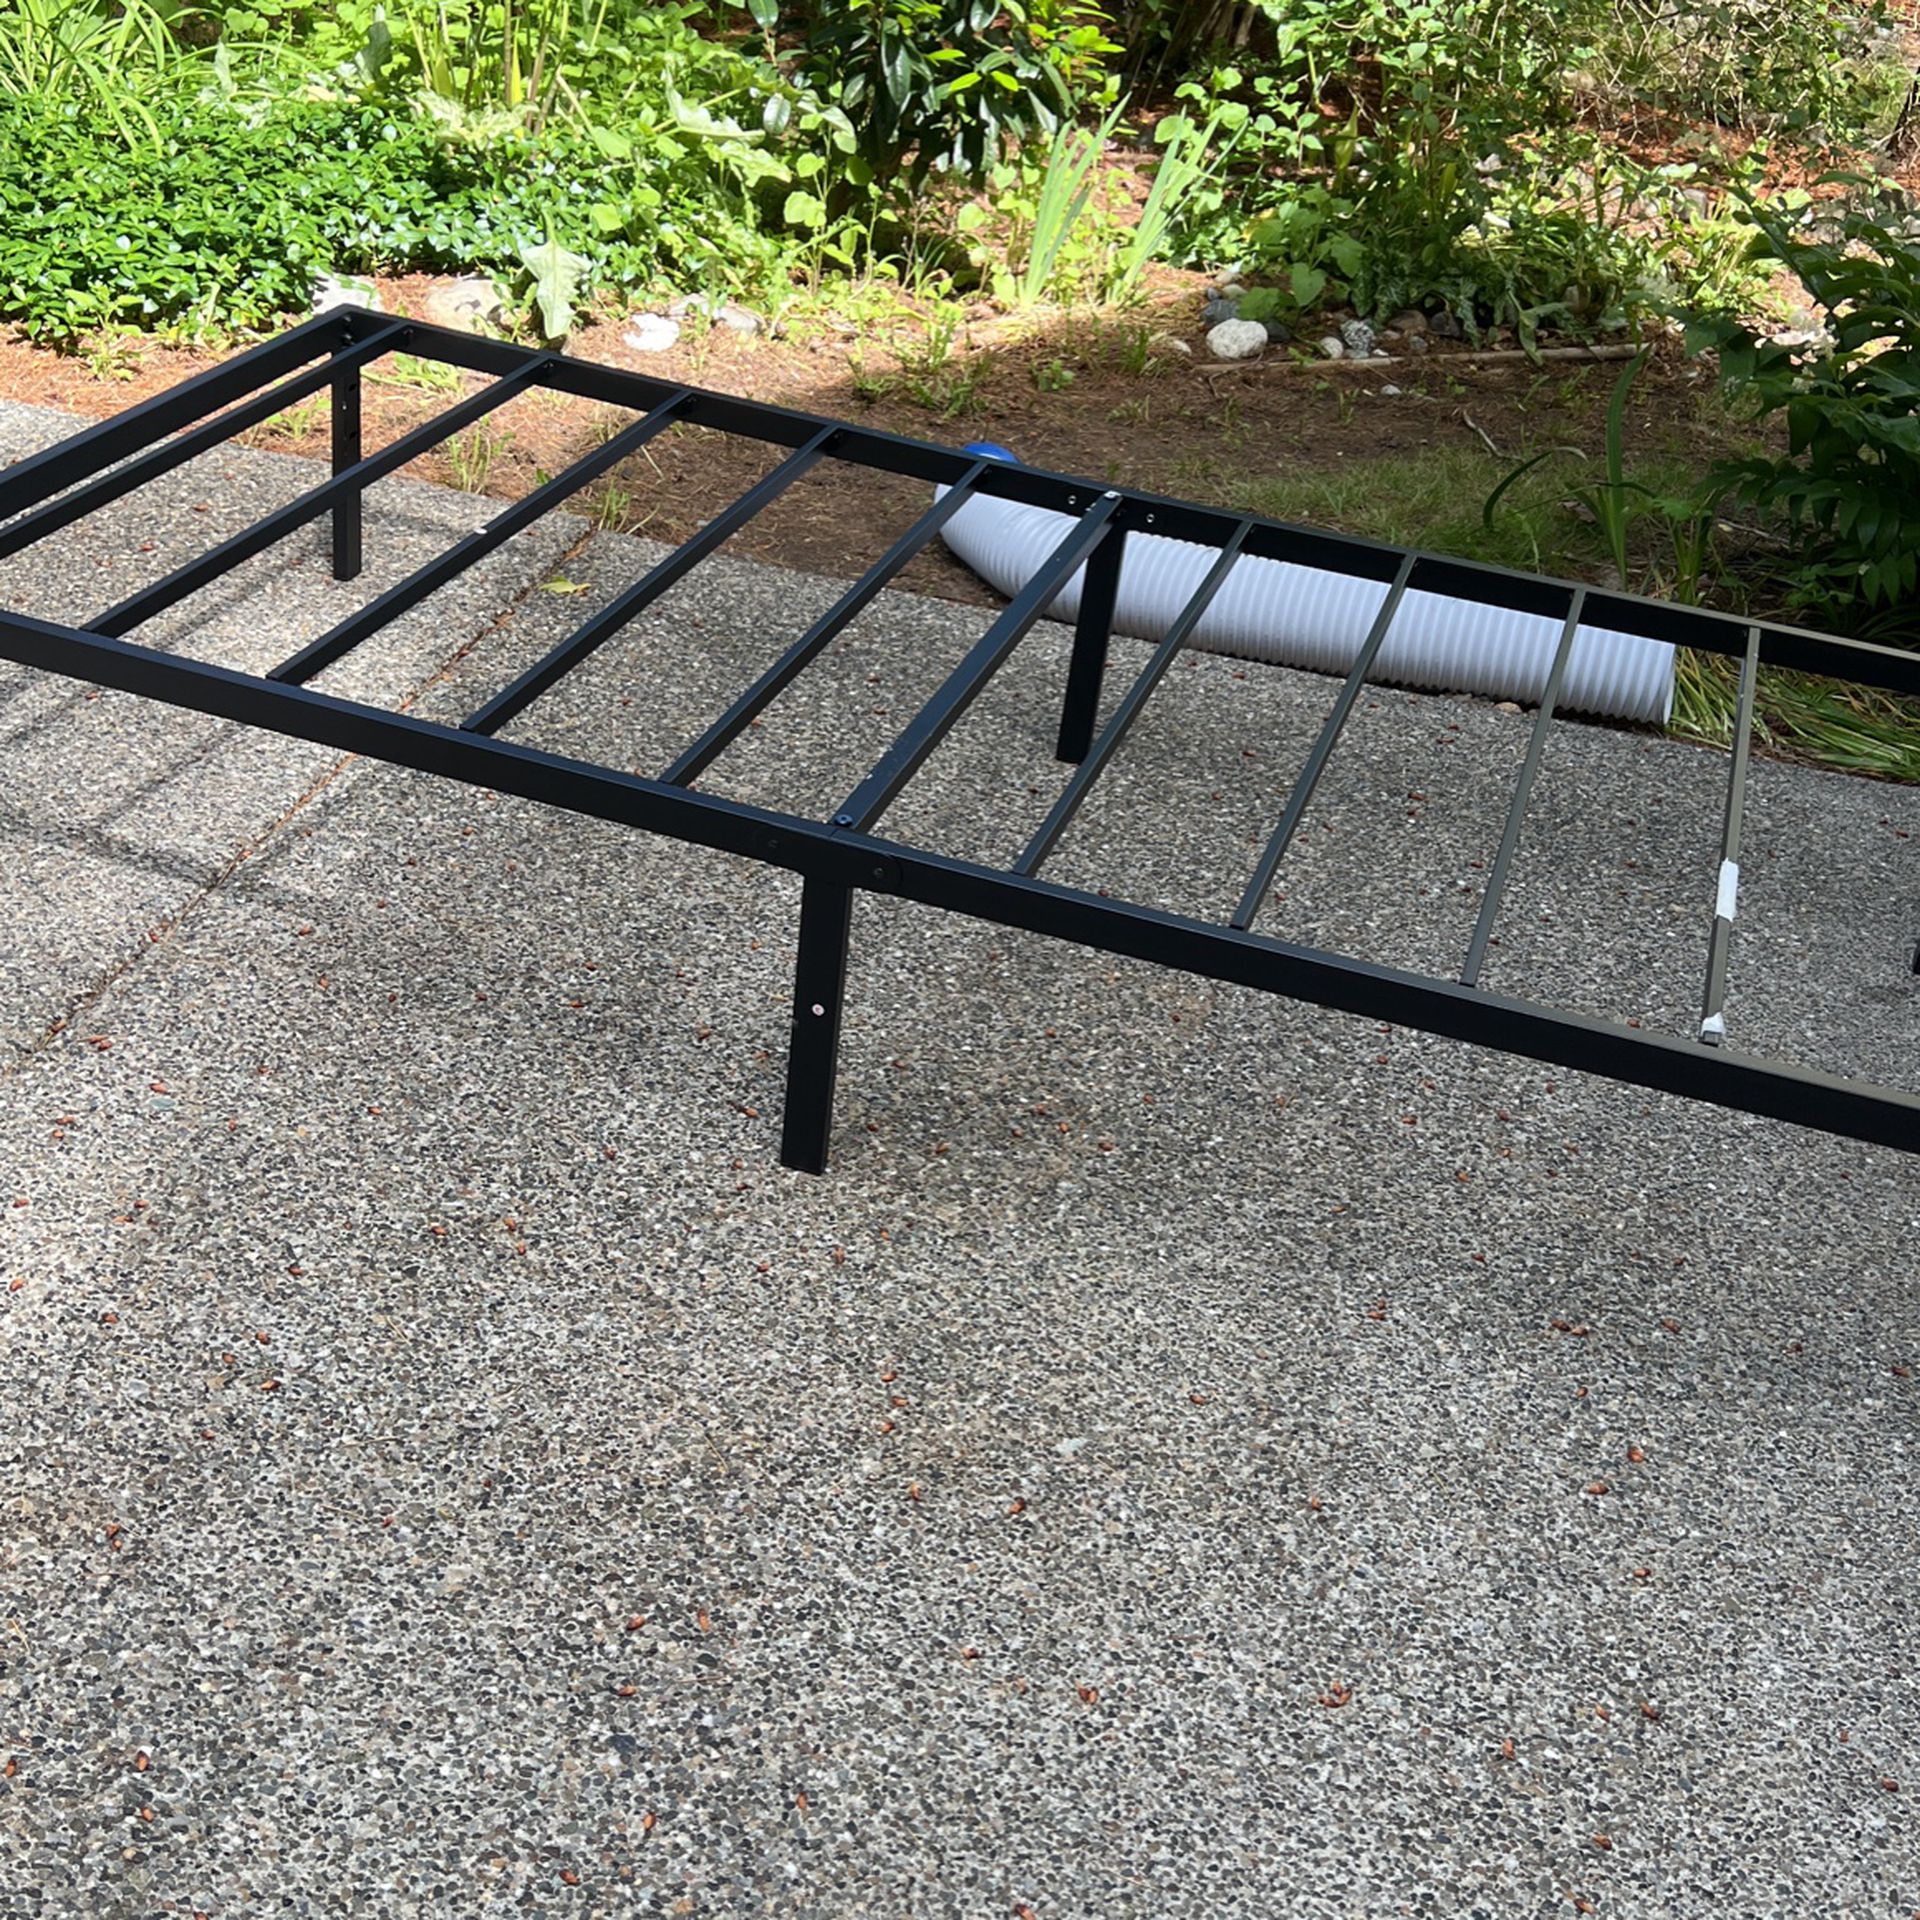 14 Inch Twin Xl Bed frame 